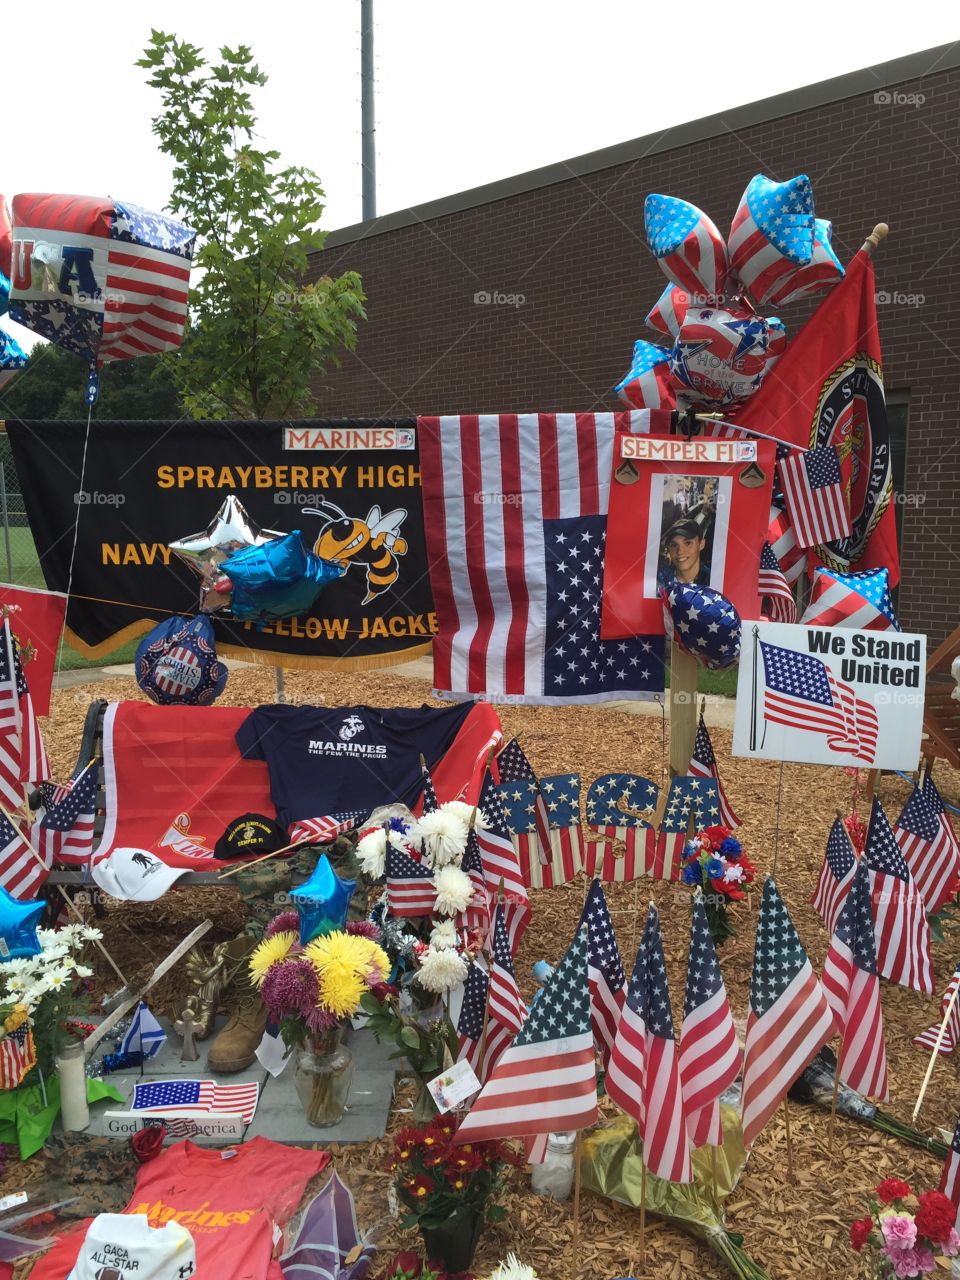 Memorial For Killed Marine . Memorial for Lance Corporal Skip Wells. Killed in the Chattanooga
attack. This memorial is set up at his local H. School